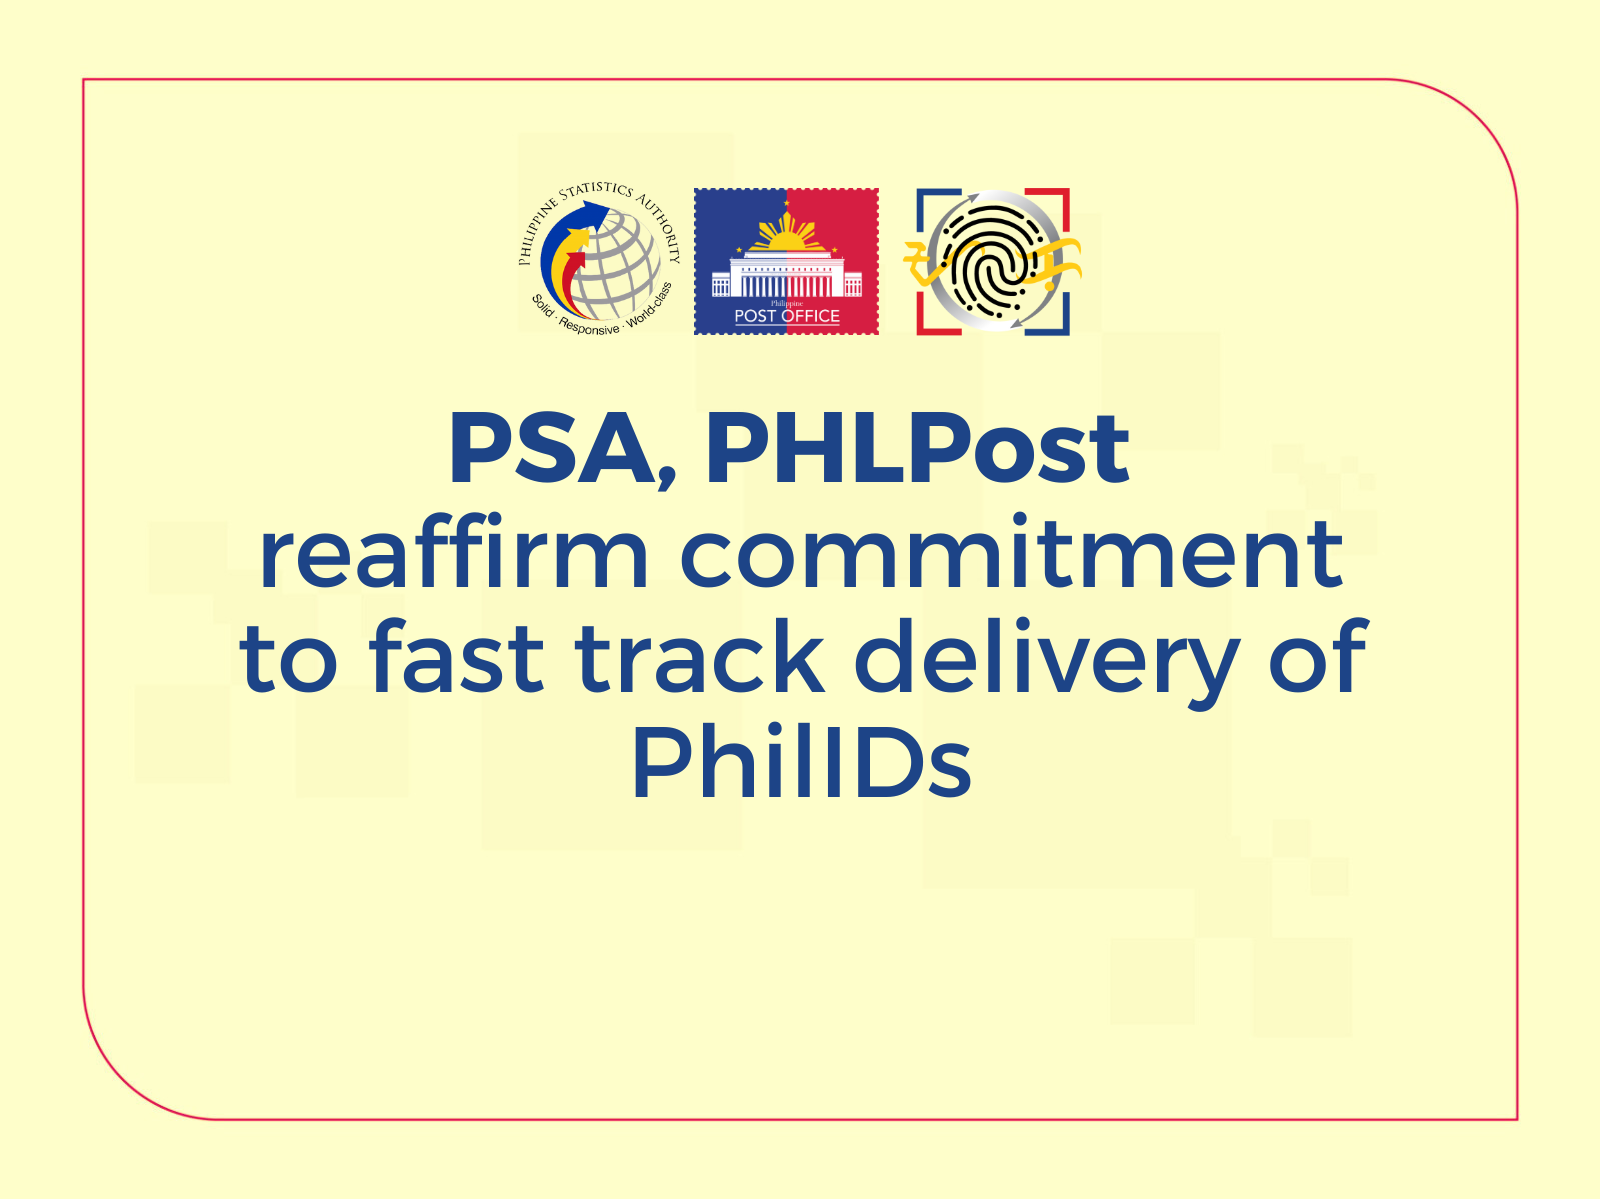 FI_PSA, PHLPost reaffirm commitment on delivery of PhilIDs